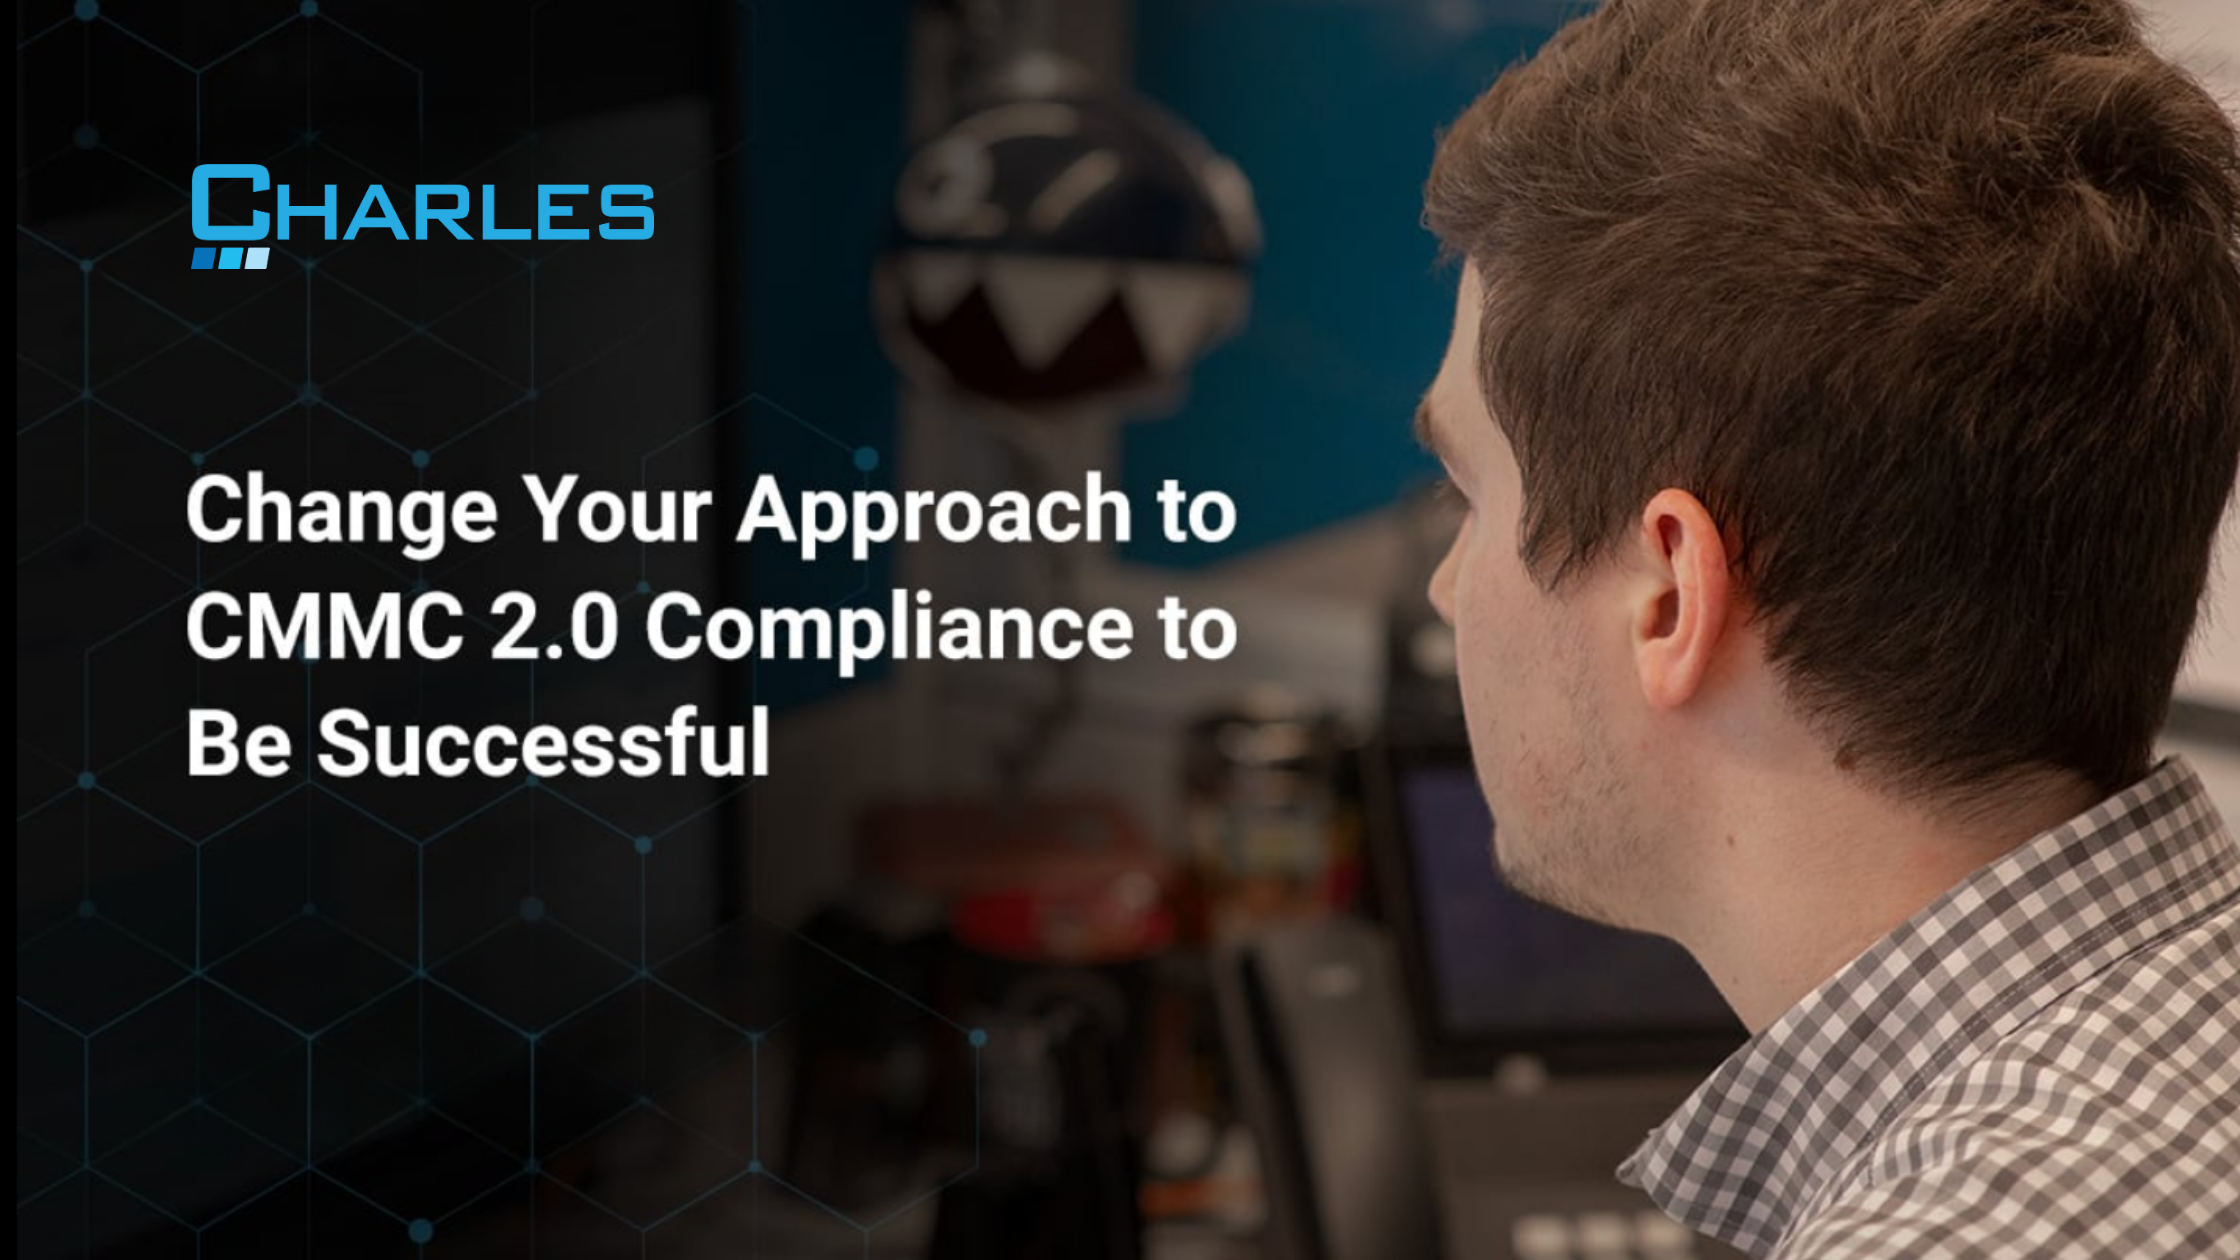 Change Your Approach to CMMC 2.0 Compliance to Be Successful